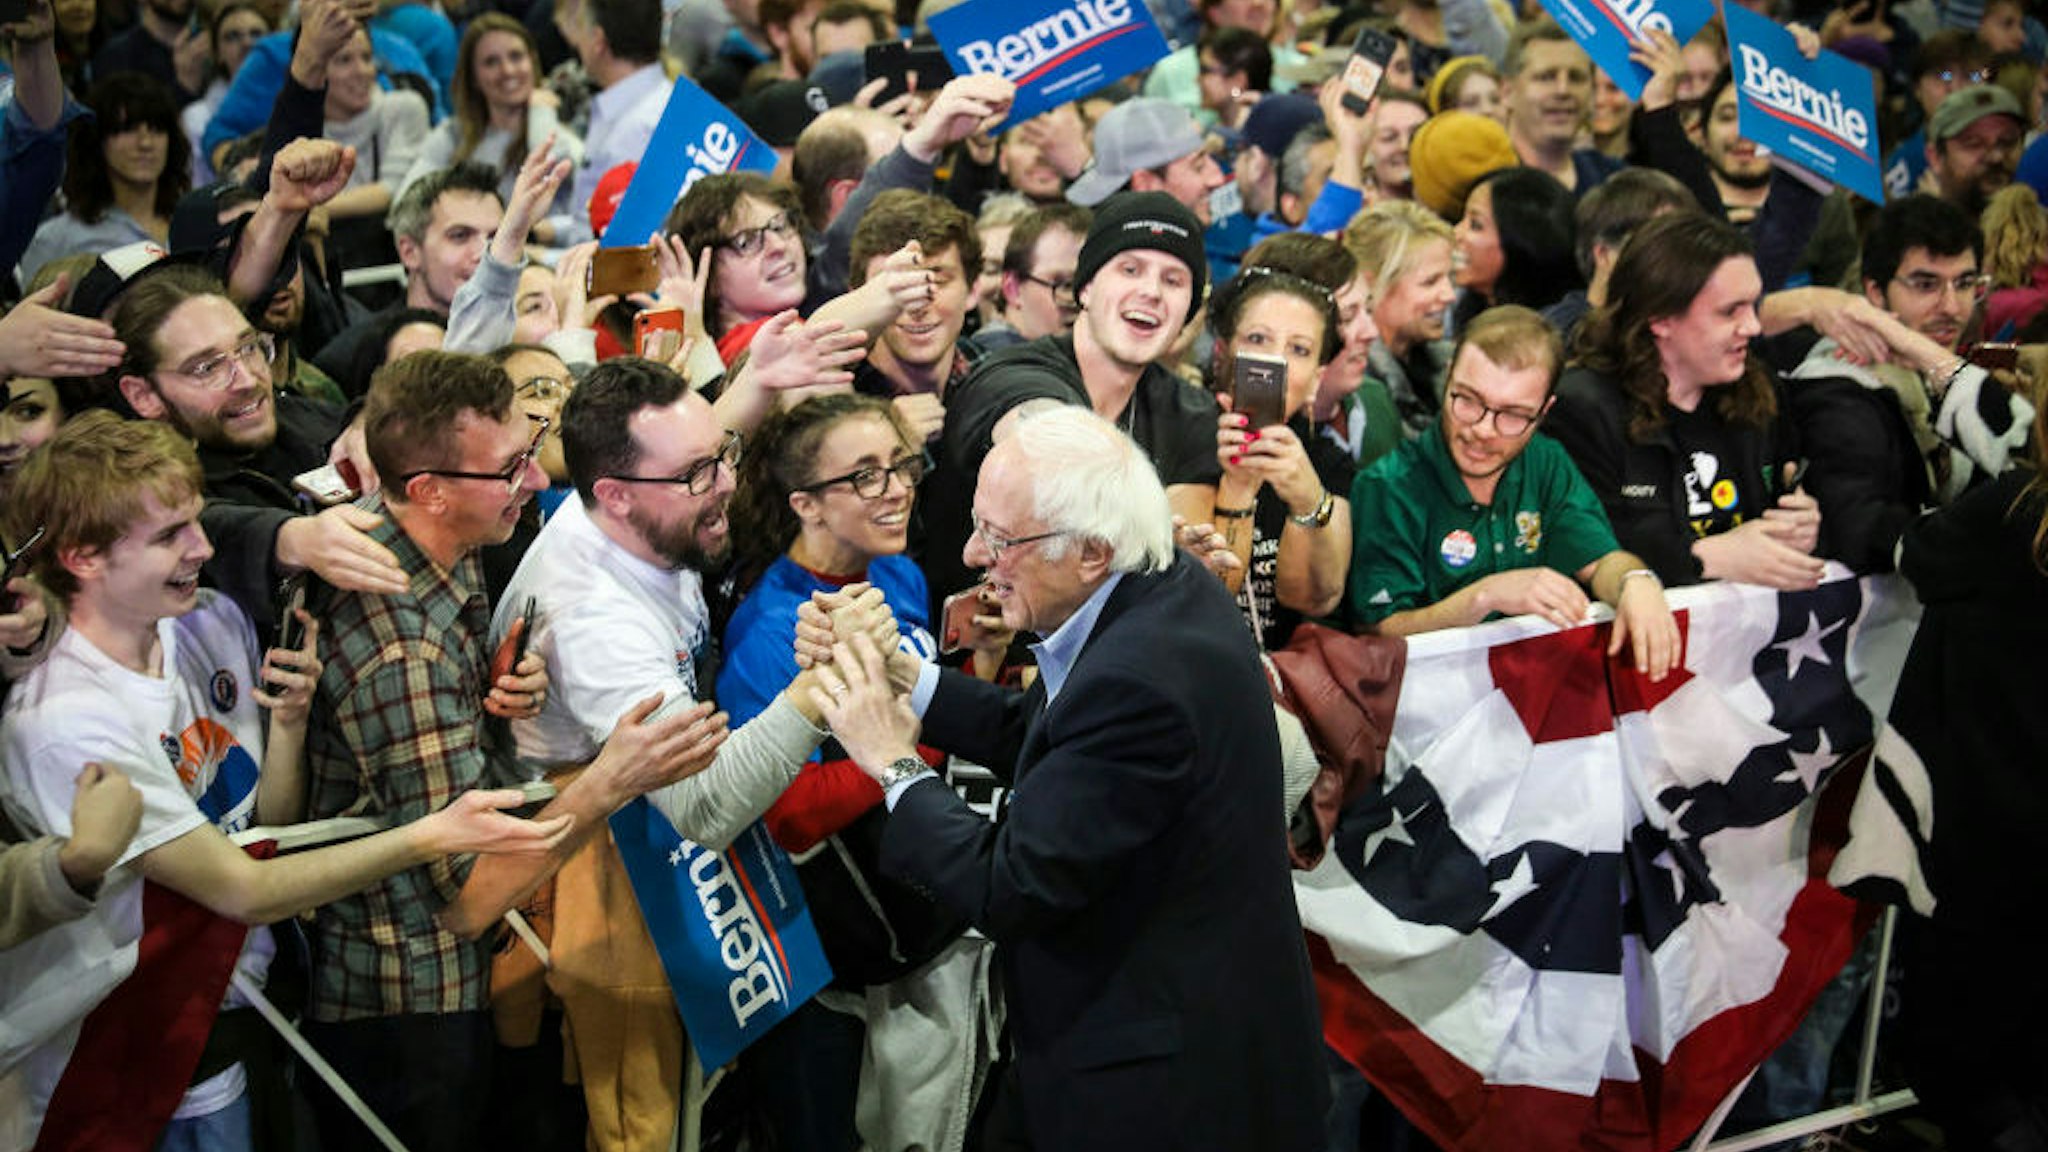 Democratic presidential candidate Sen. Bernie Sanders (I-VT) greets the crowd after speaking to a large group of supporters at a rally in the Colorado Convention Center on February 16, 2020 in Denver, Colorado. (Photo by Marc Piscotty/Getty Images)